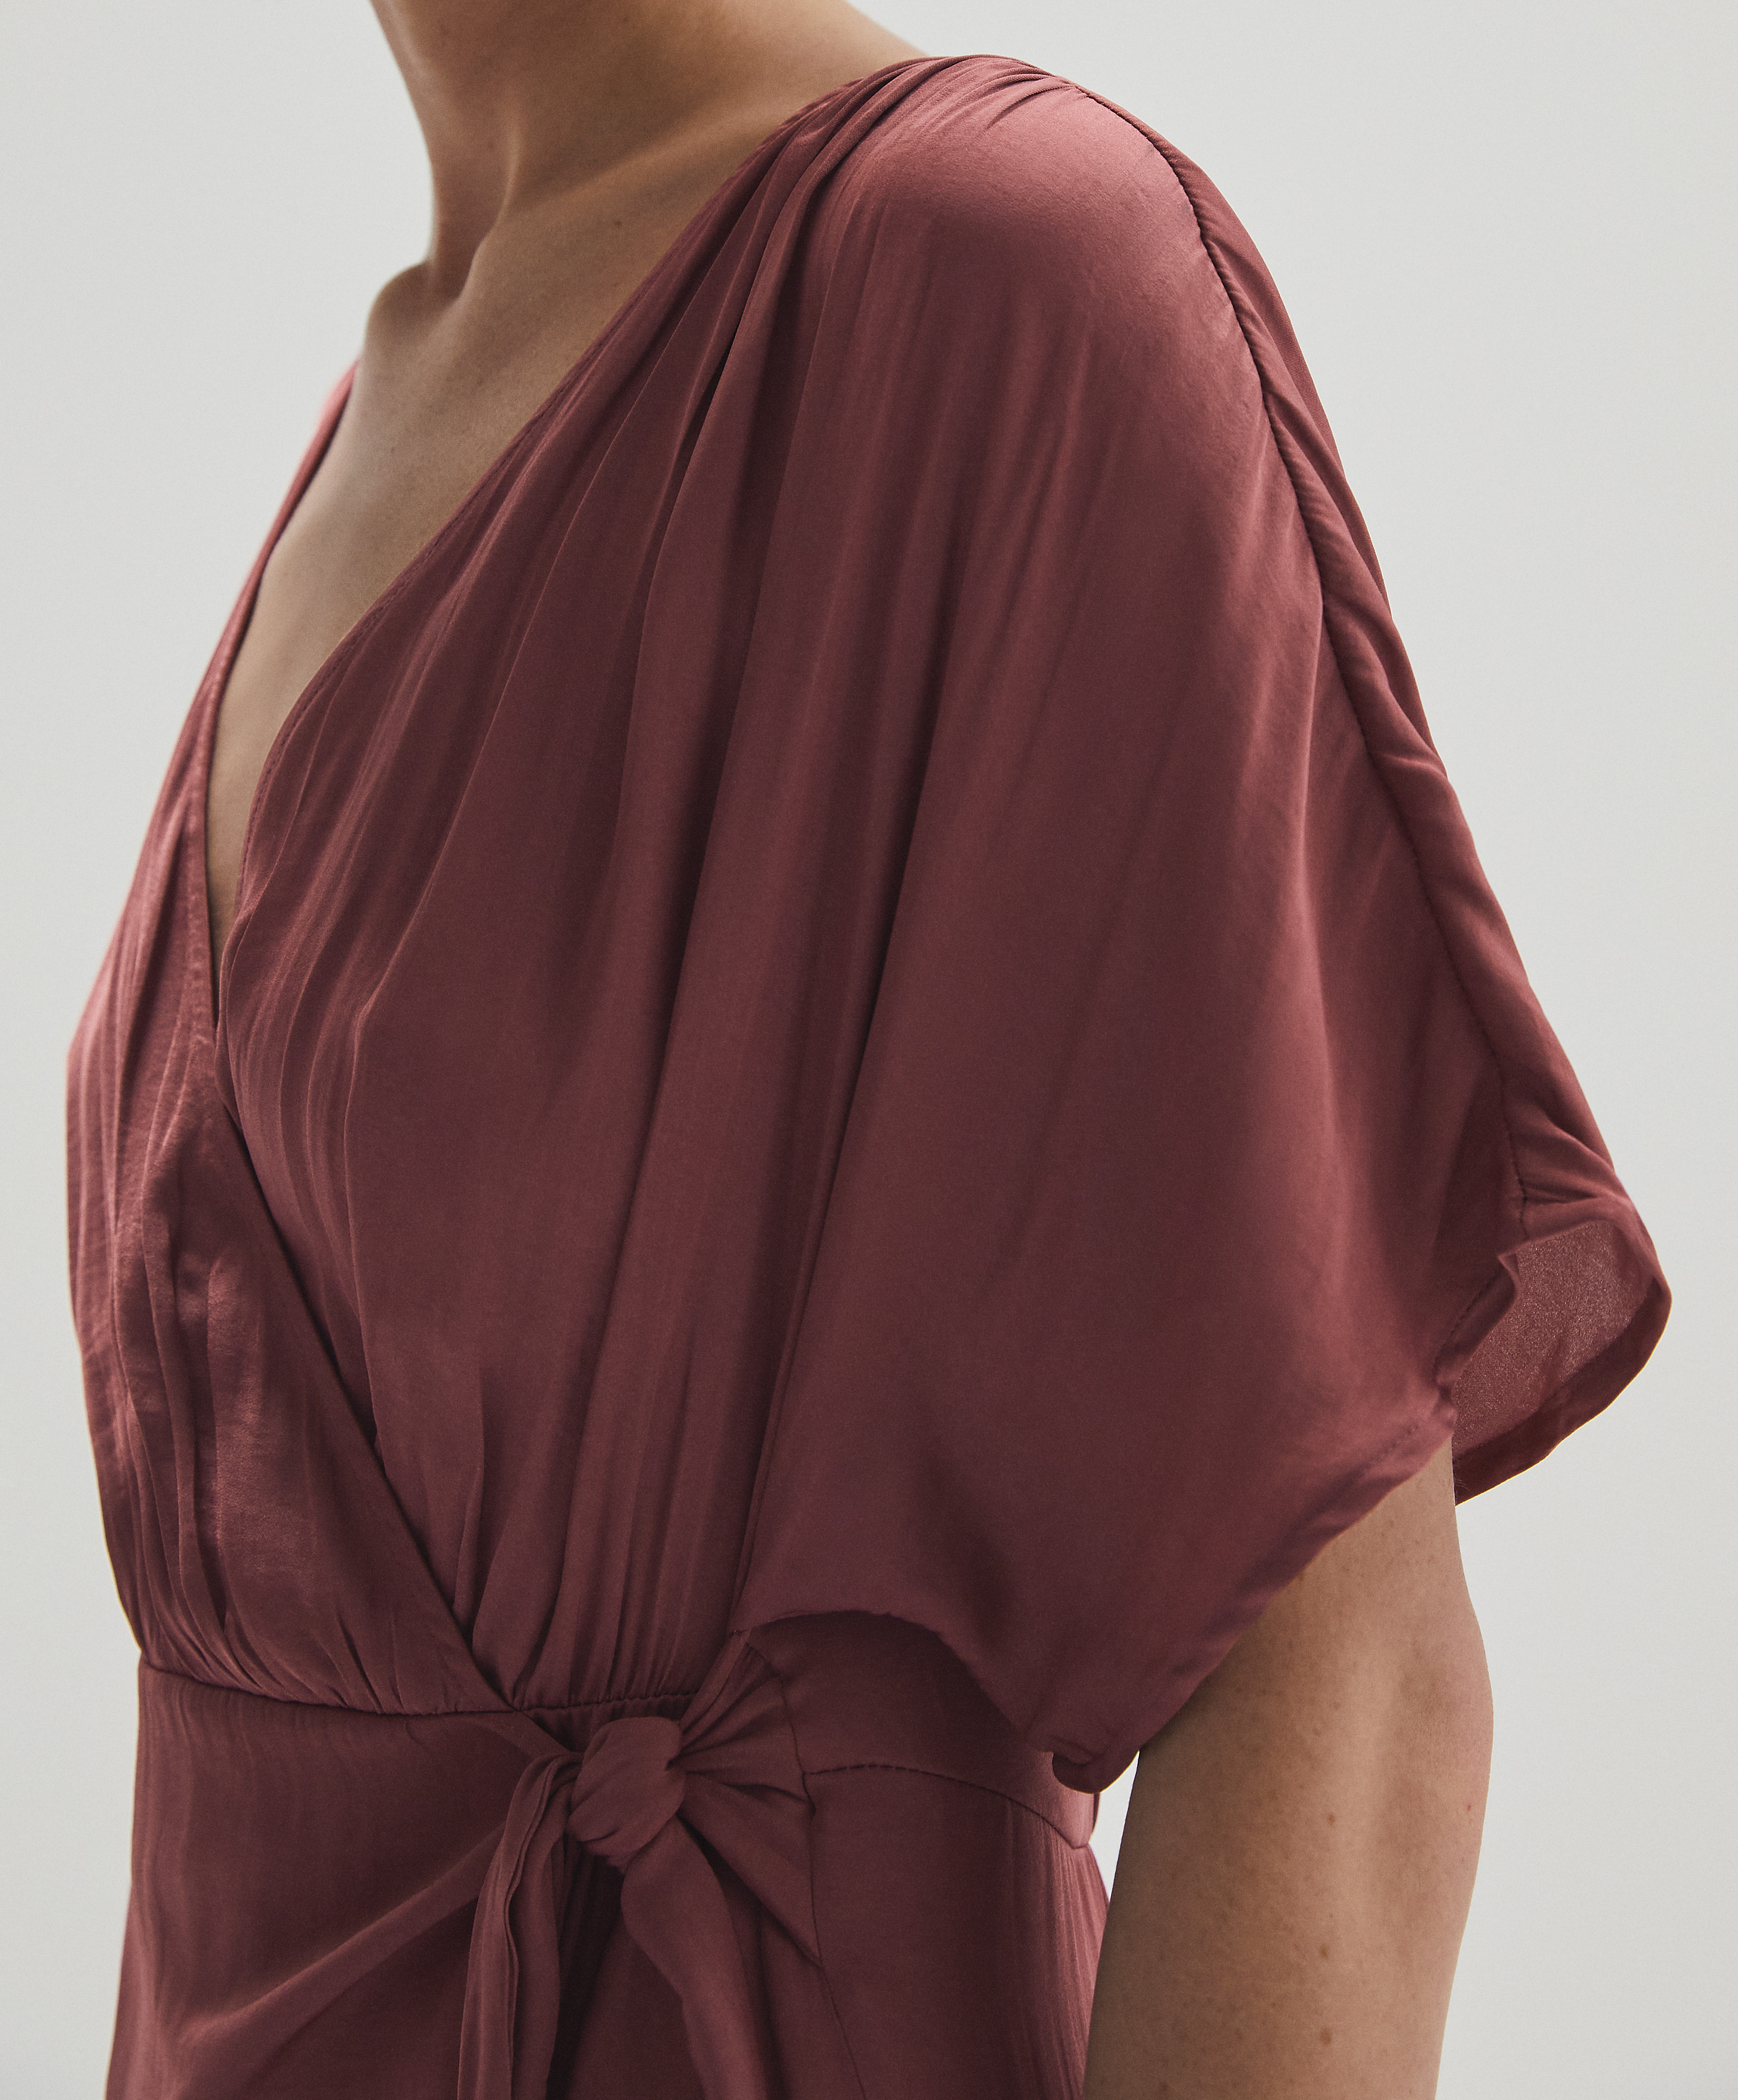 Satin wrap dress - View all - Join life ...